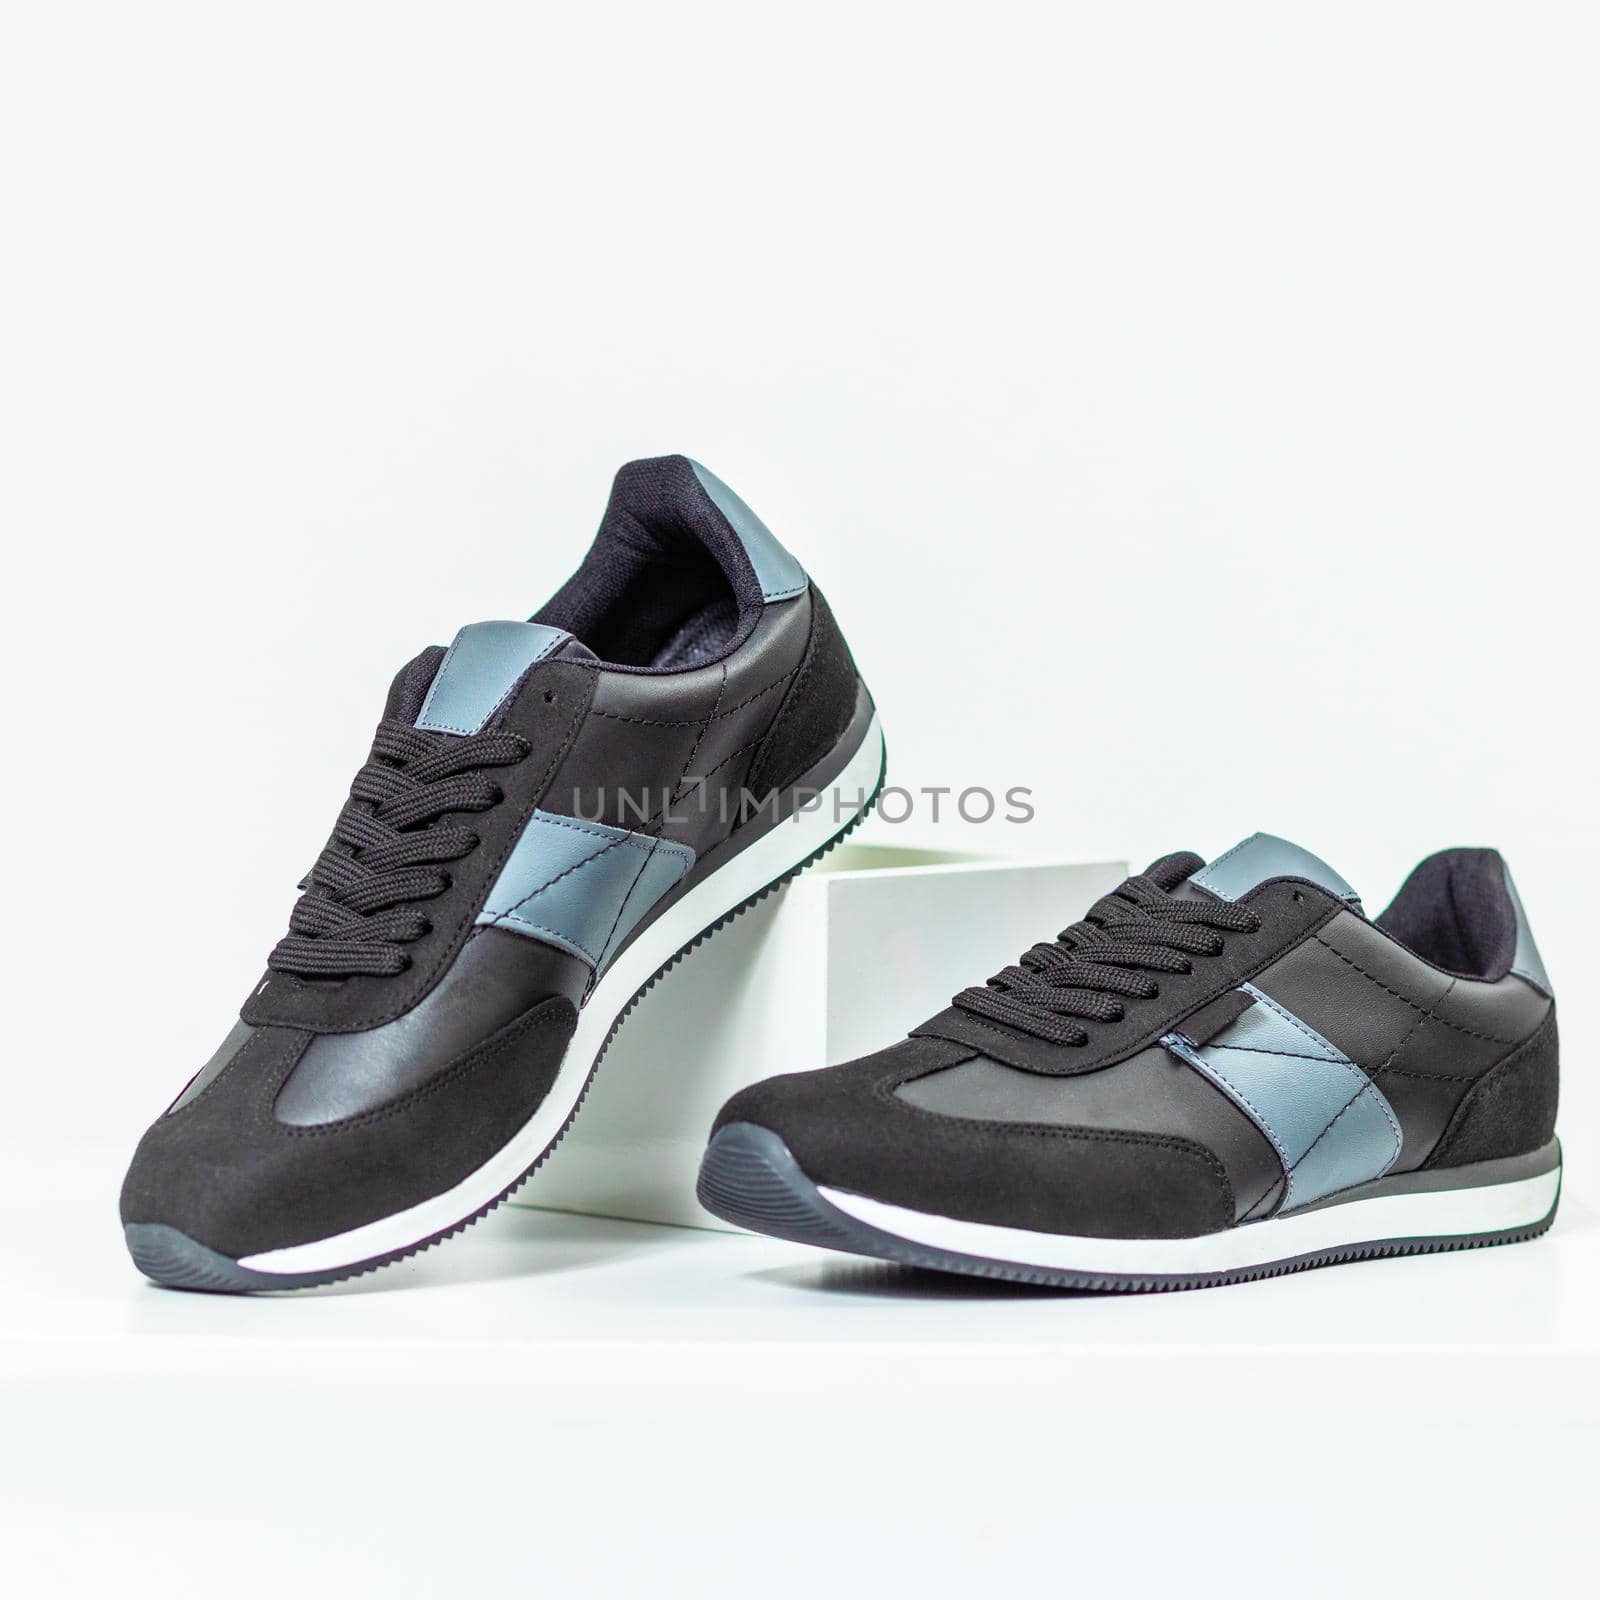 Black male sneakers shoes isolated background by ferhad